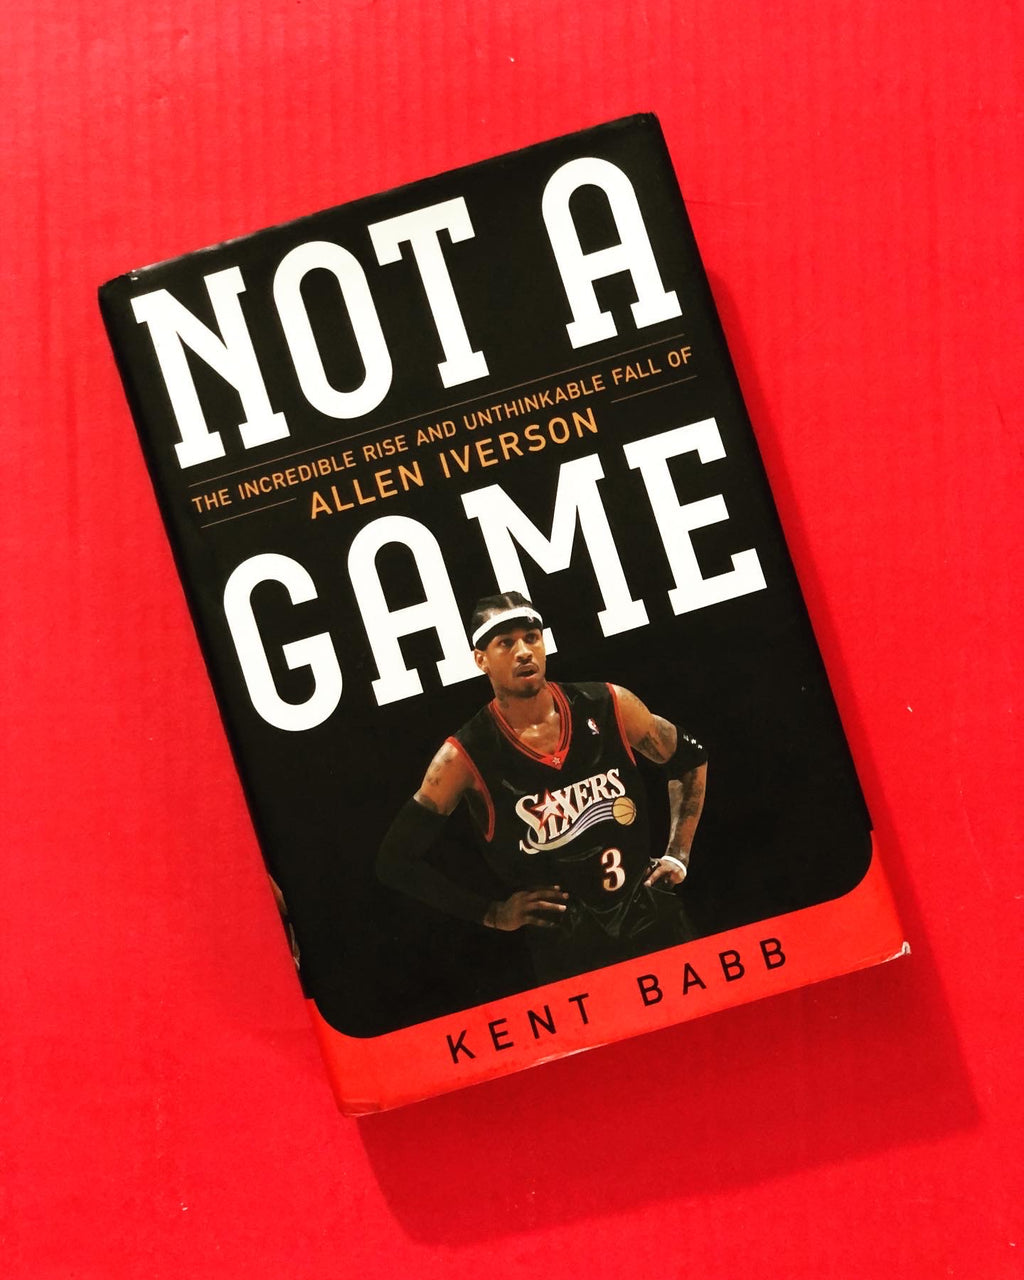 Not a Game- By Kent Babb